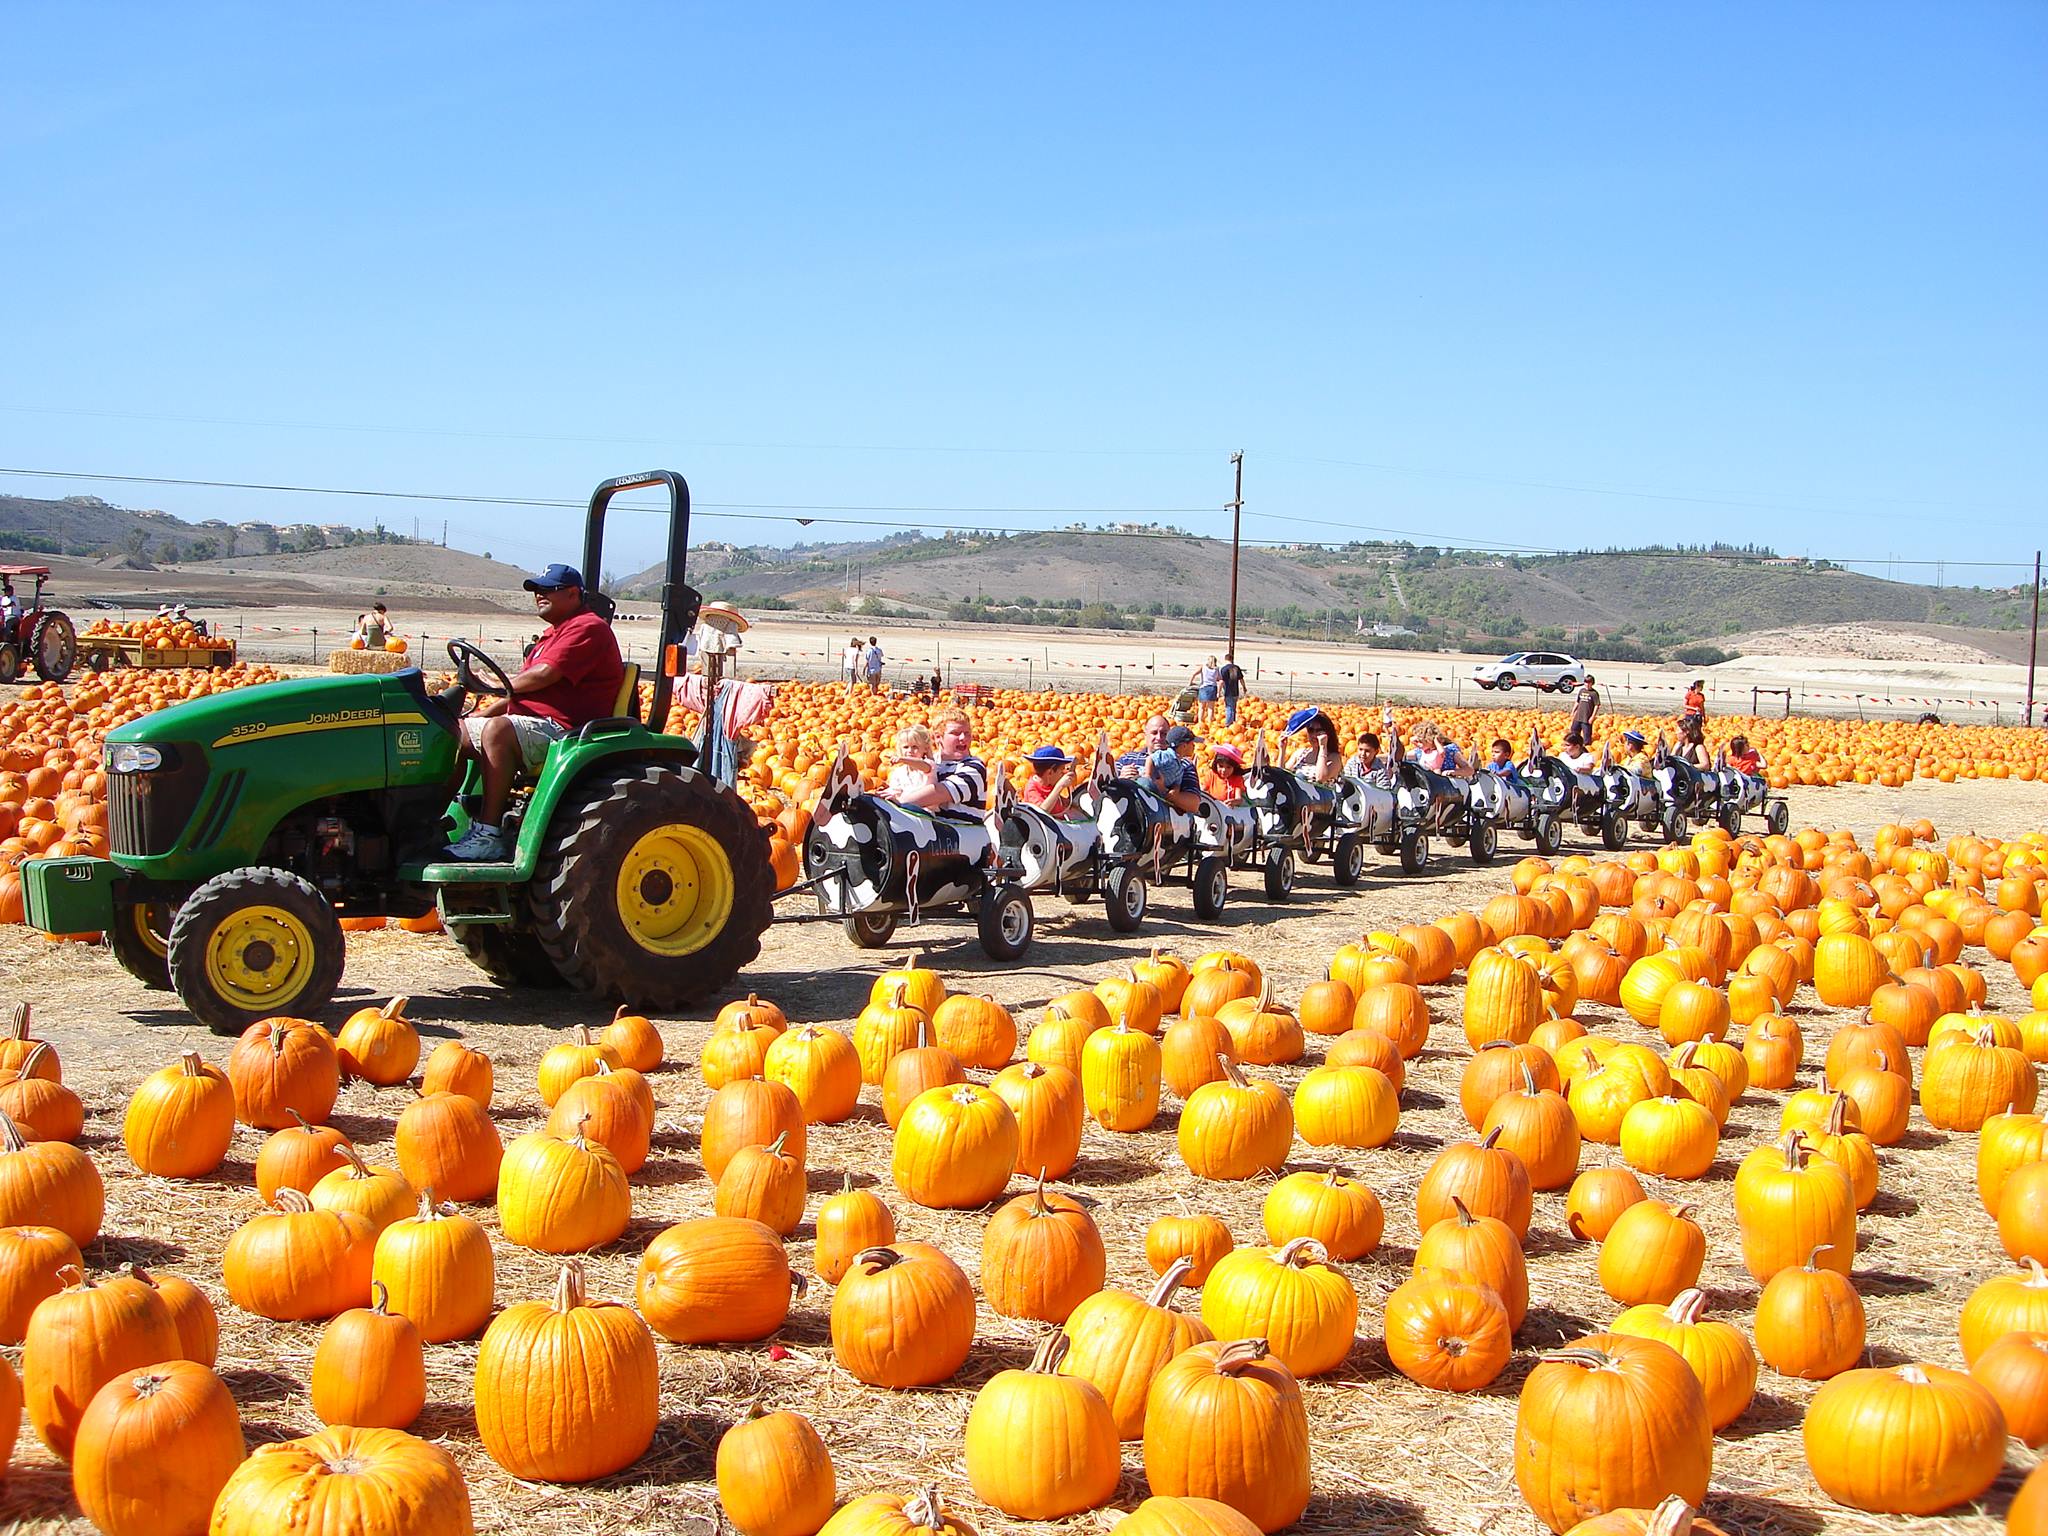 Underwood Family Farms Harvest Festival is one of the many fun things to do this weekend in Los Angeles with kids.